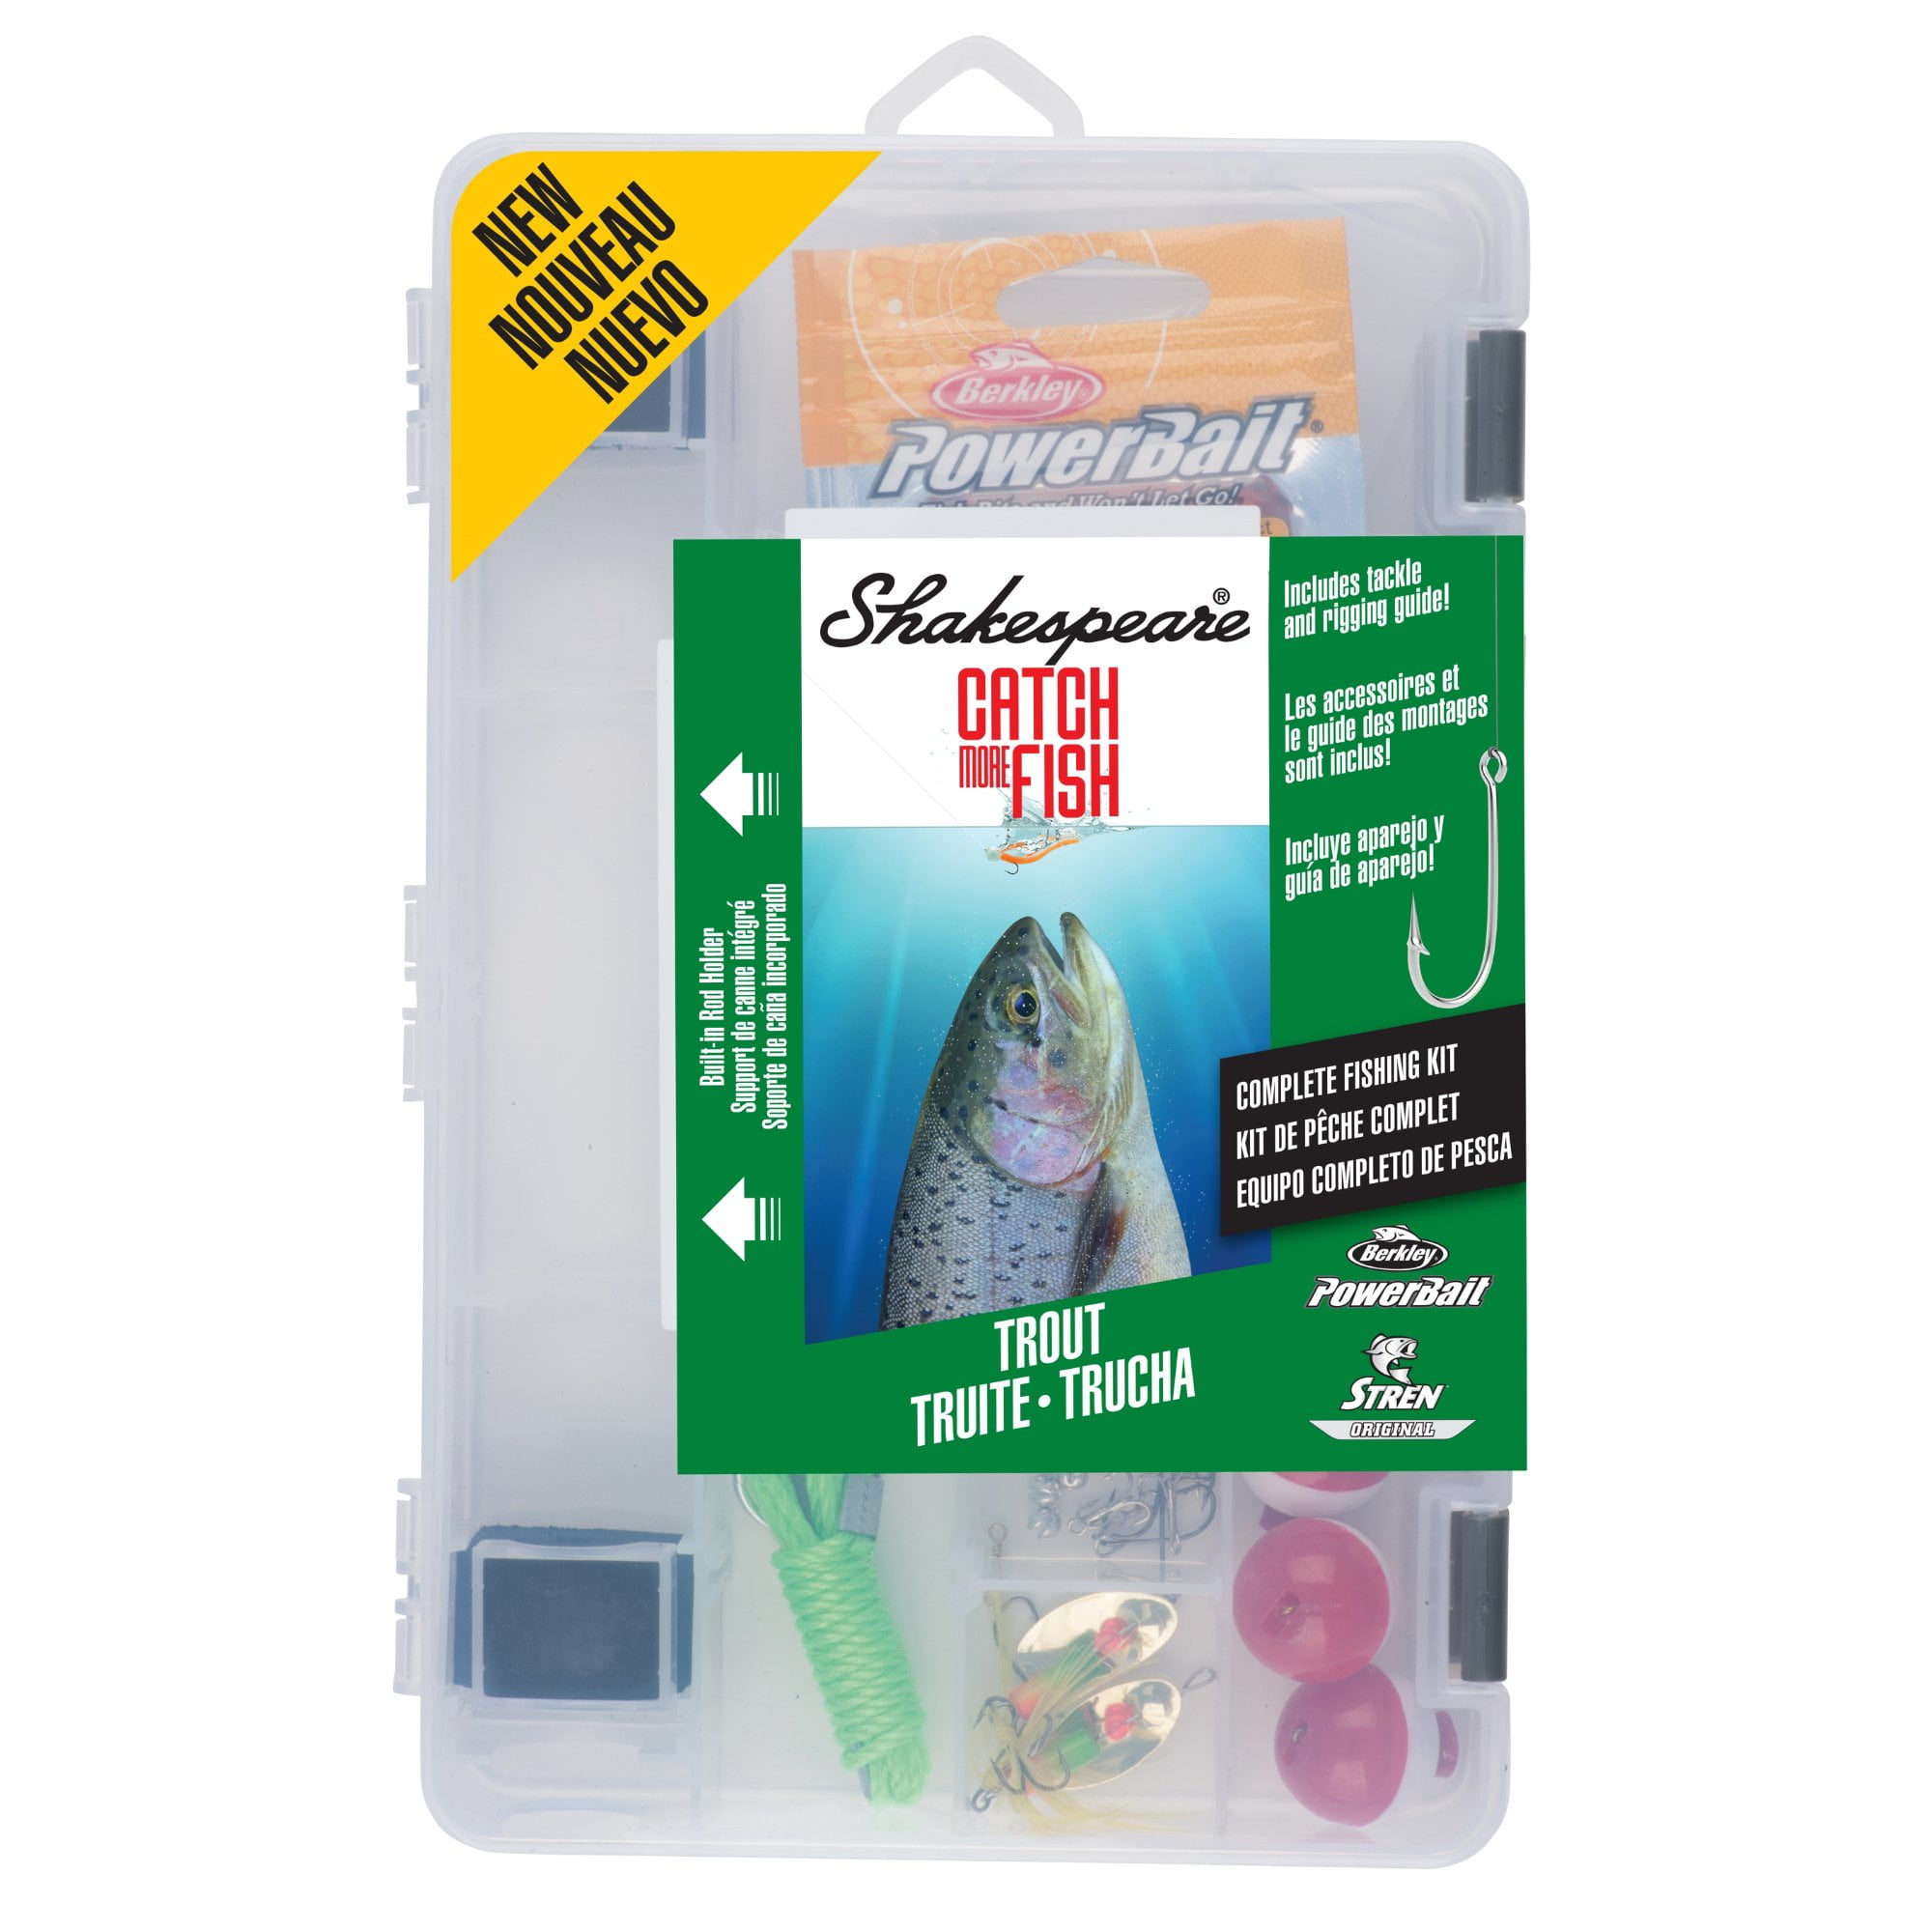 Shakespeare Catch More Fish Catfish Spin Combo Review - video